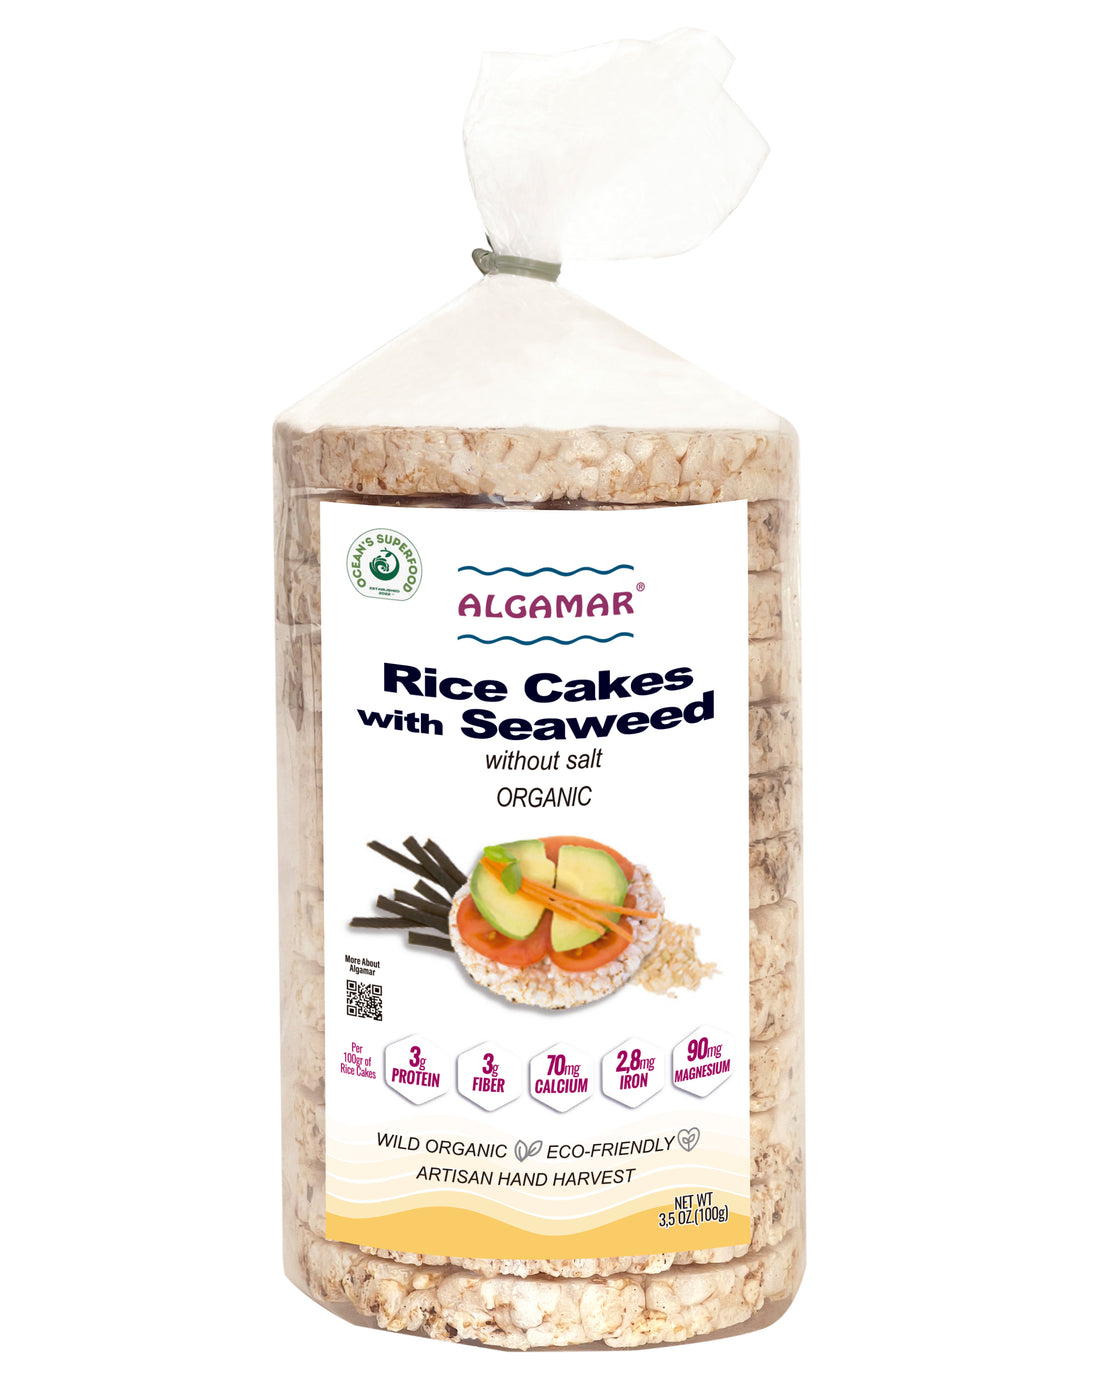 Rice Cakes with Seaweed without Salt, Organic